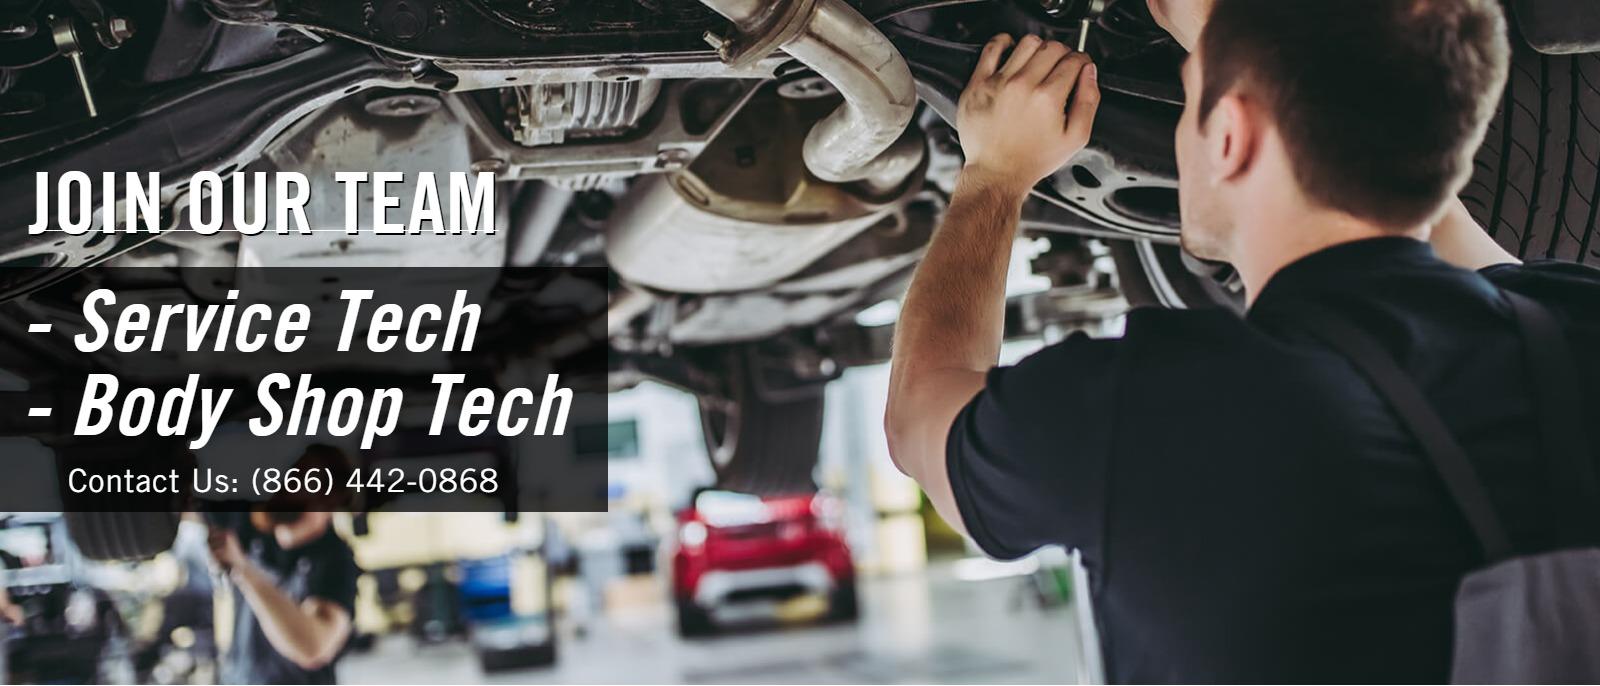 Join Our Team: Service Tech and Body Shop Tech